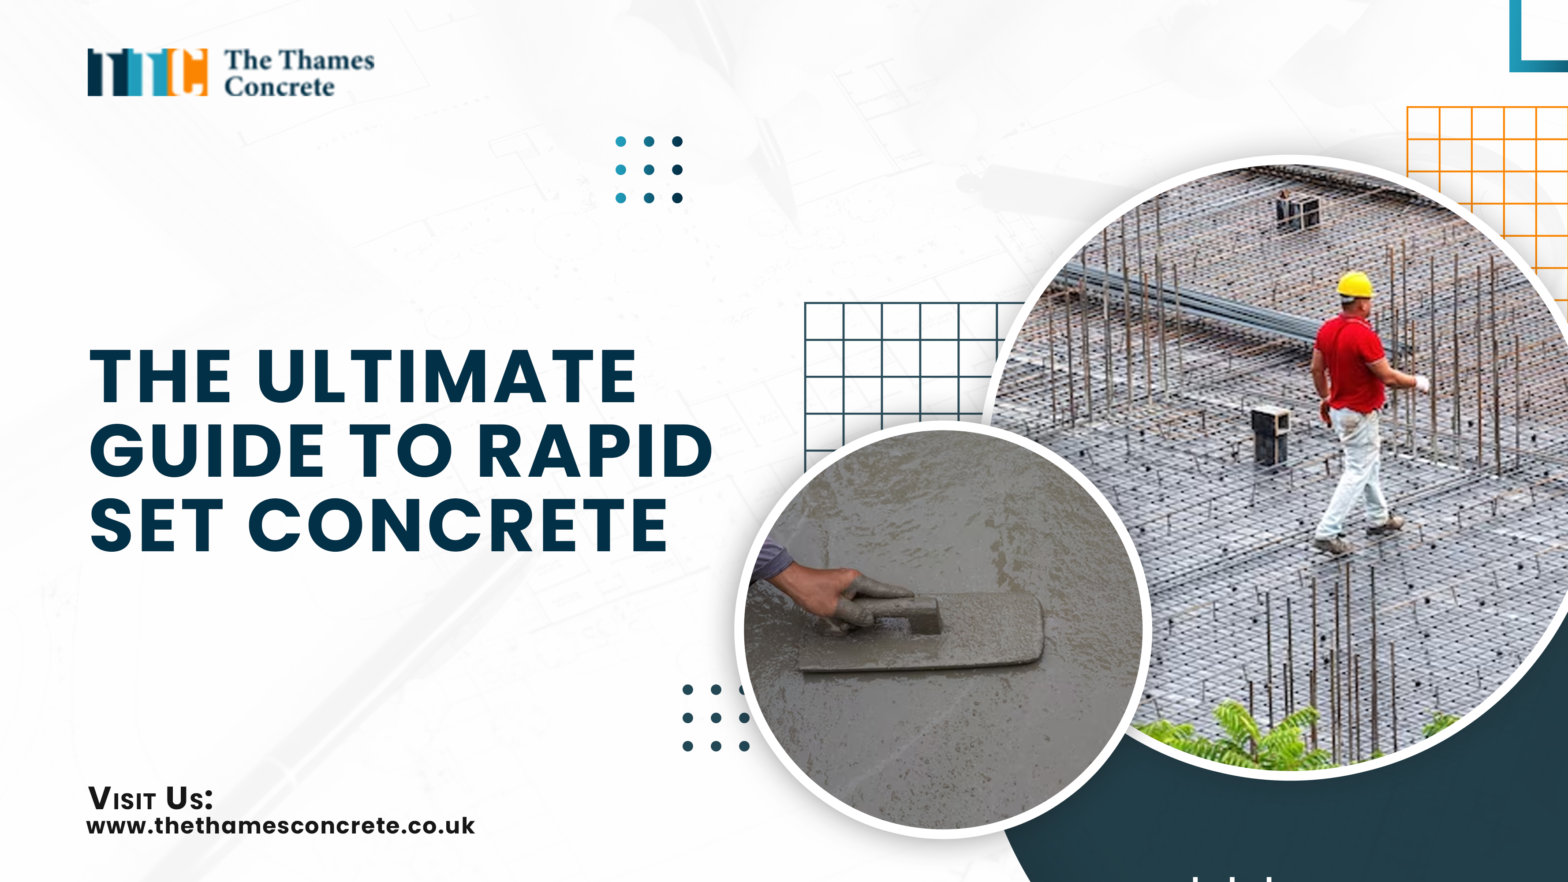 The Ultimate Guide to Rapid-Set Concrete